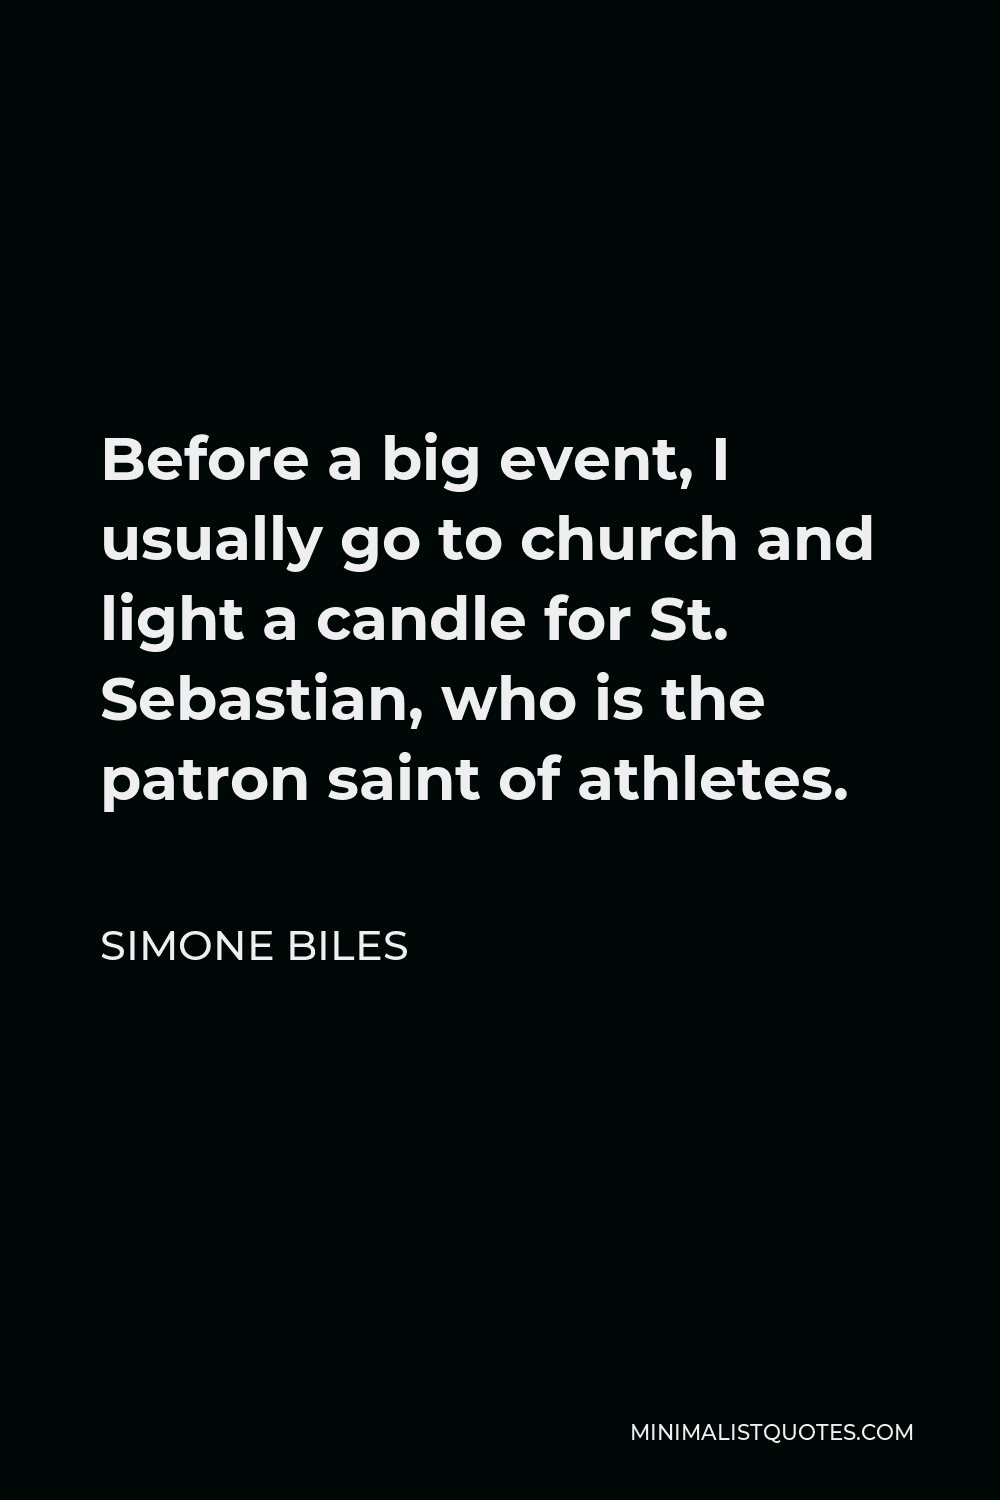 Simone Biles Quote - Before a big event, I usually go to church and light a candle for St. Sebastian, who is the patron saint of athletes.